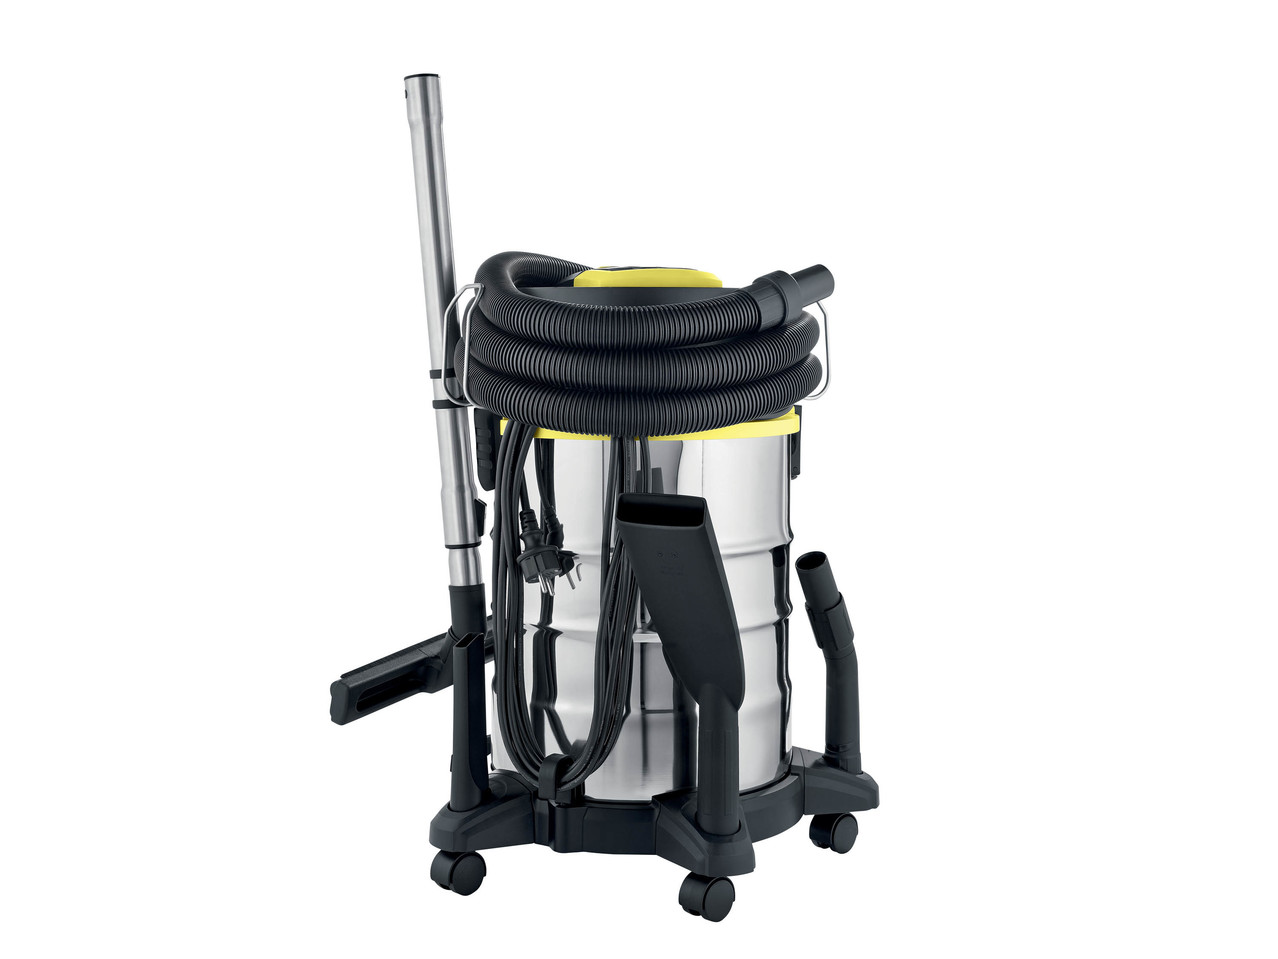 PARKSIDE 1500W Wet and Dry Vacuum Cleaner